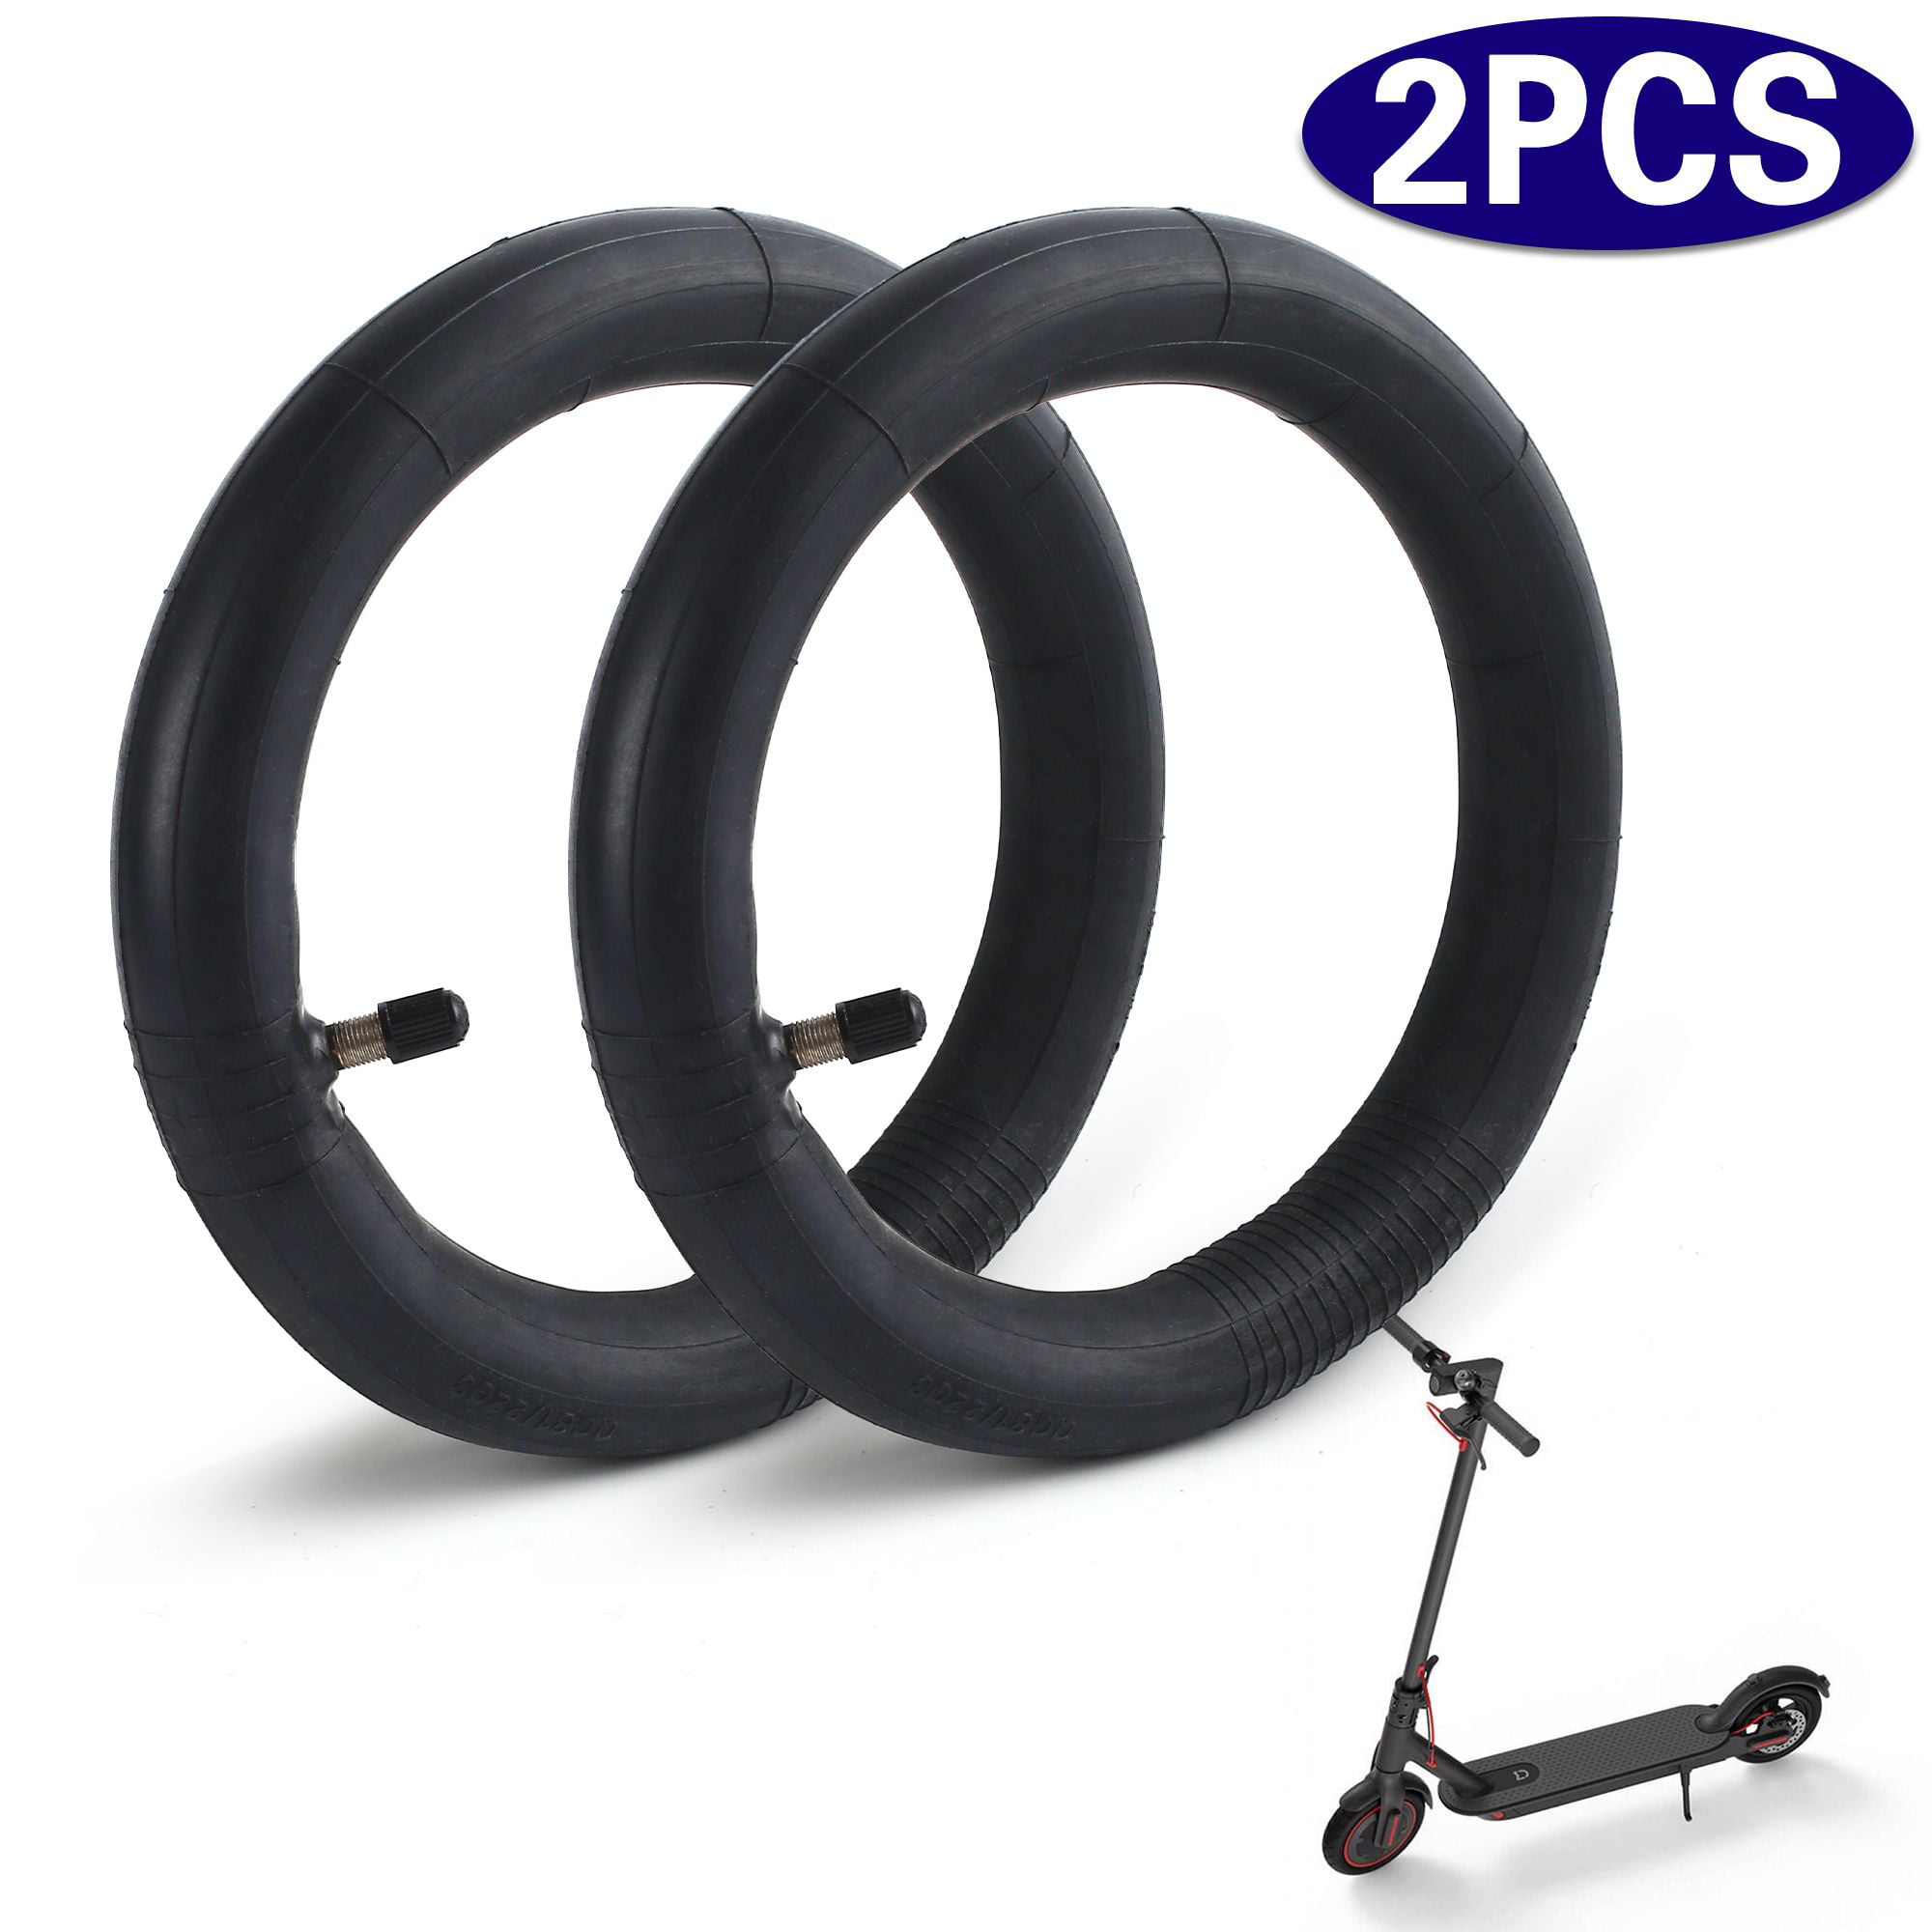 8.5 inch Thicker Tire Tube Inner Tyre for Xiaomi M365 Electric Scooter